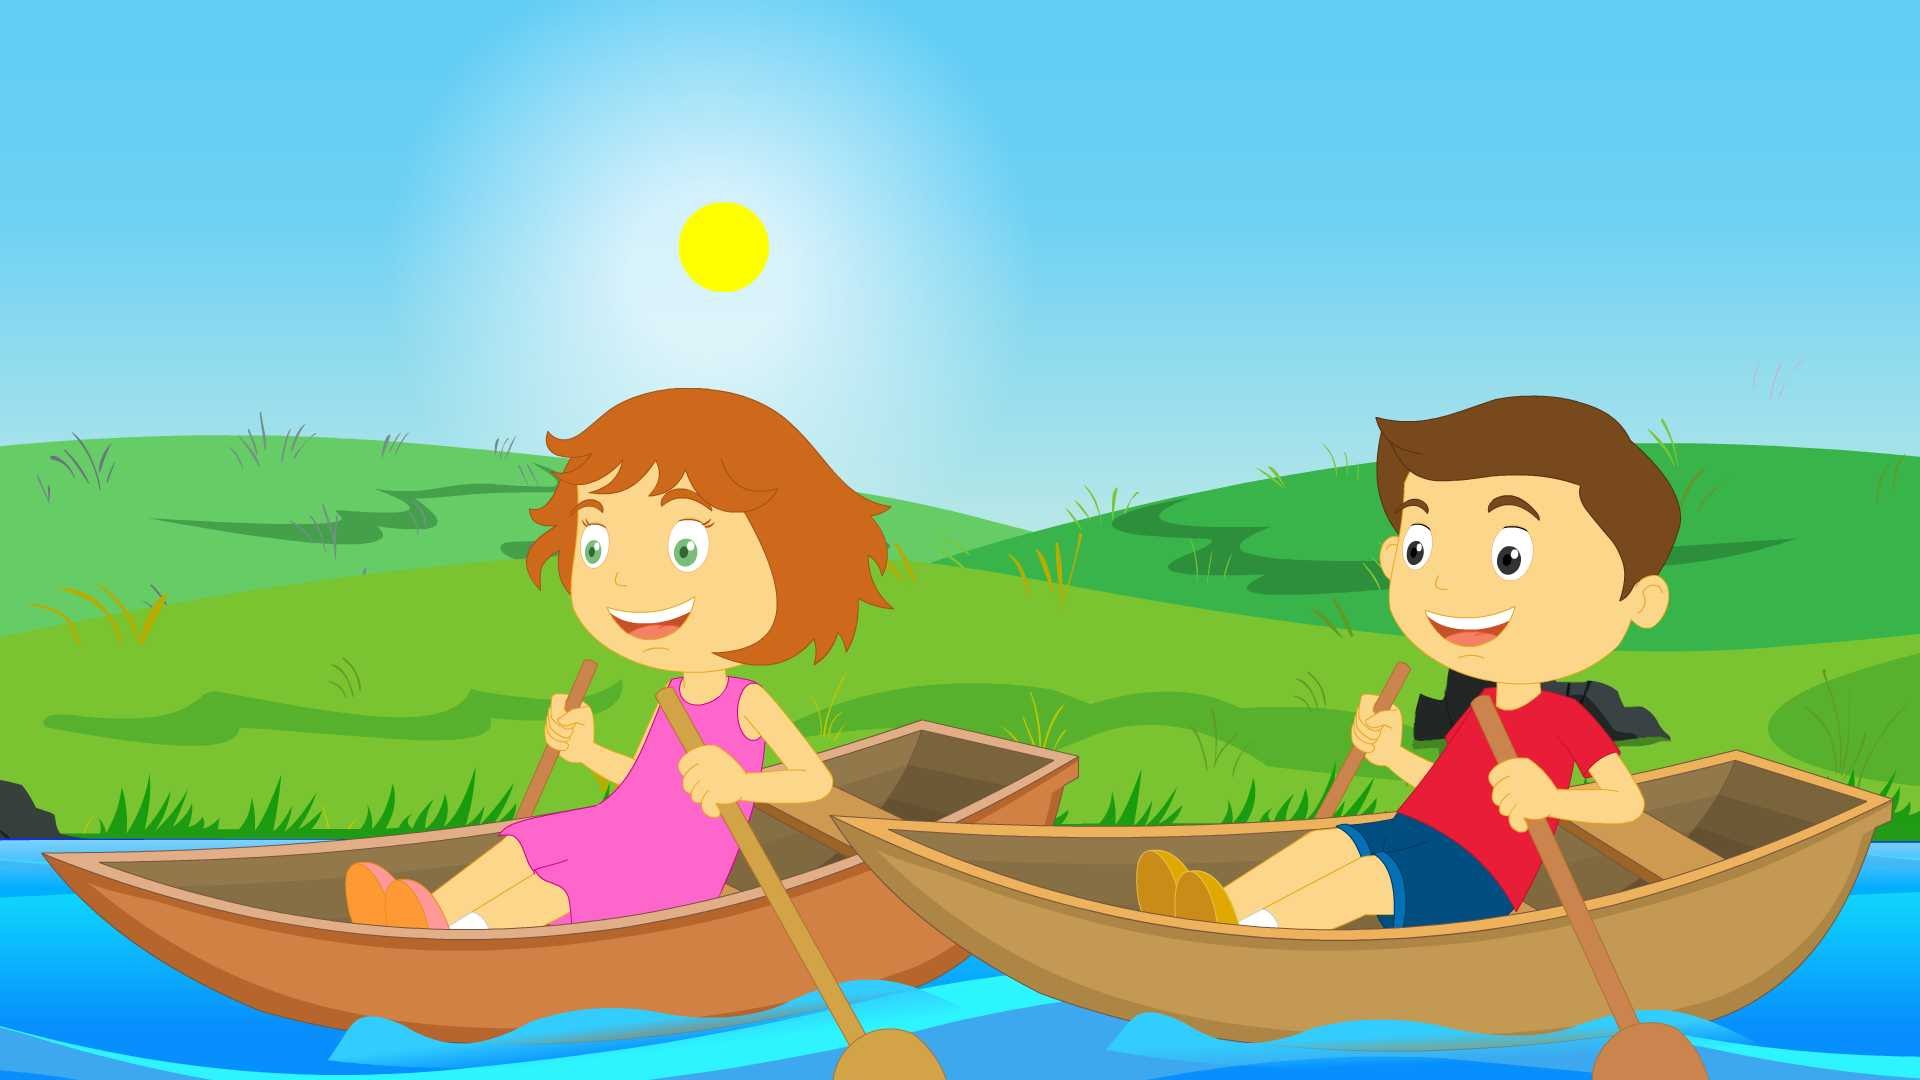 Clip Arts Related To : baby sail boat cartoon. view all Play Boat Cliparts)...